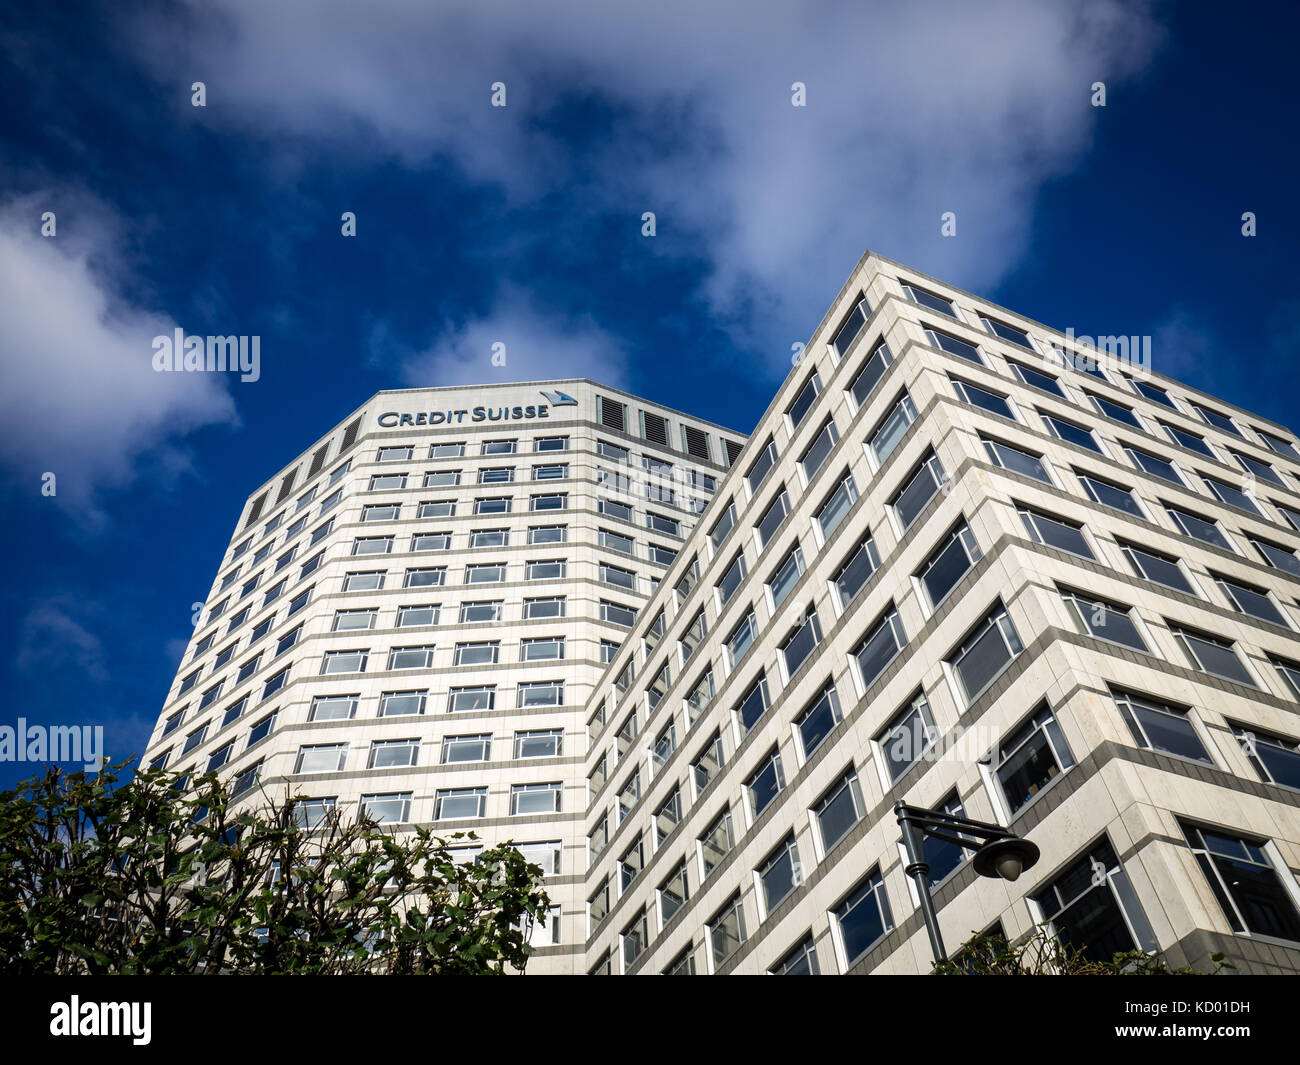 Credit Suisse Canary Wharf London UK Stock Photo